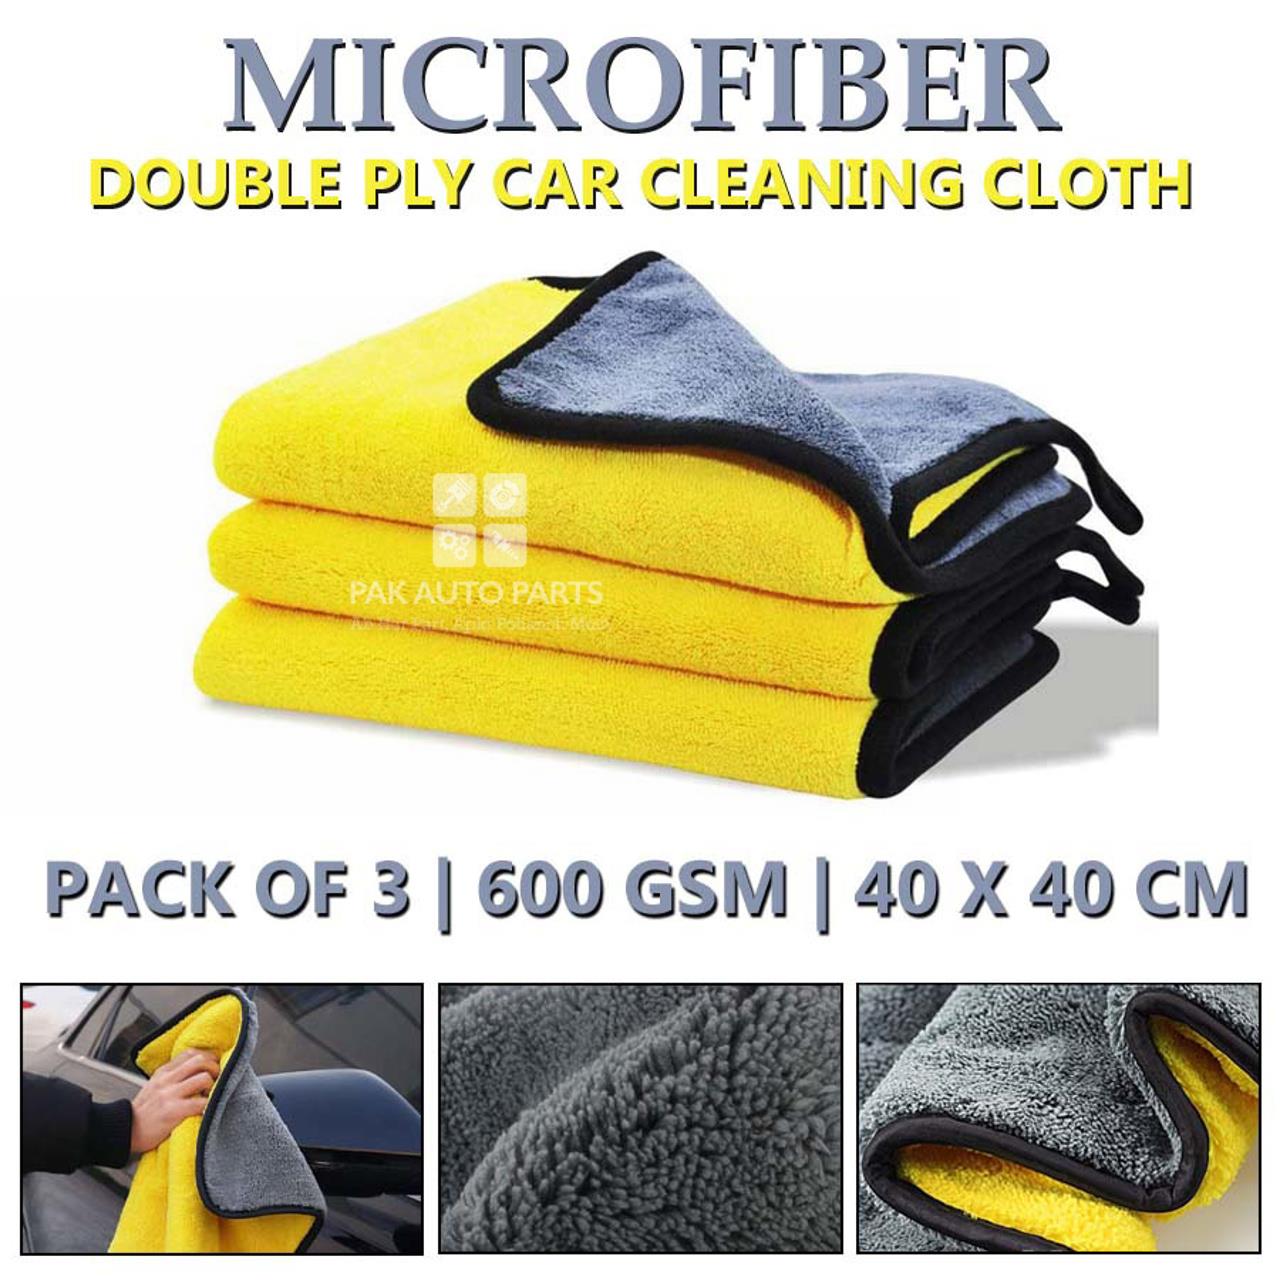 Picture of Microfiber Car Cleaning Cloth - Pasted Double Ply - 600 Gsm - 40x40 cm - Pack Of 3